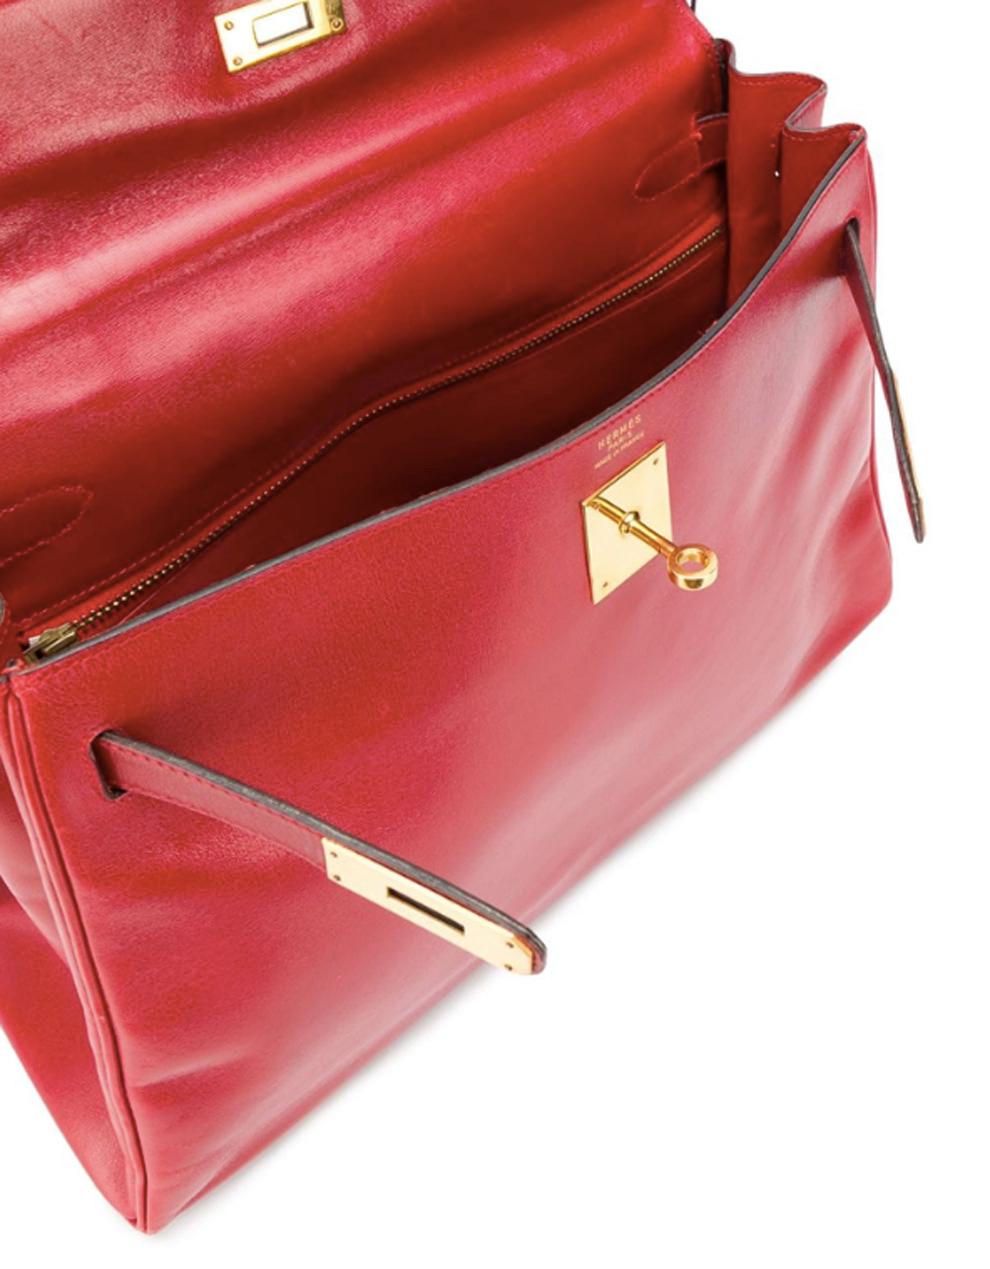 1980s Hermès red box calf leather Kelly tote bag 32cm featuring foldover top with twist-lock closure, a top handle, a trapeze body, plated-gold hardware, an internal slip pocket,  a detachable box calf shoulder strap.
Marked Hermès Paris Made in